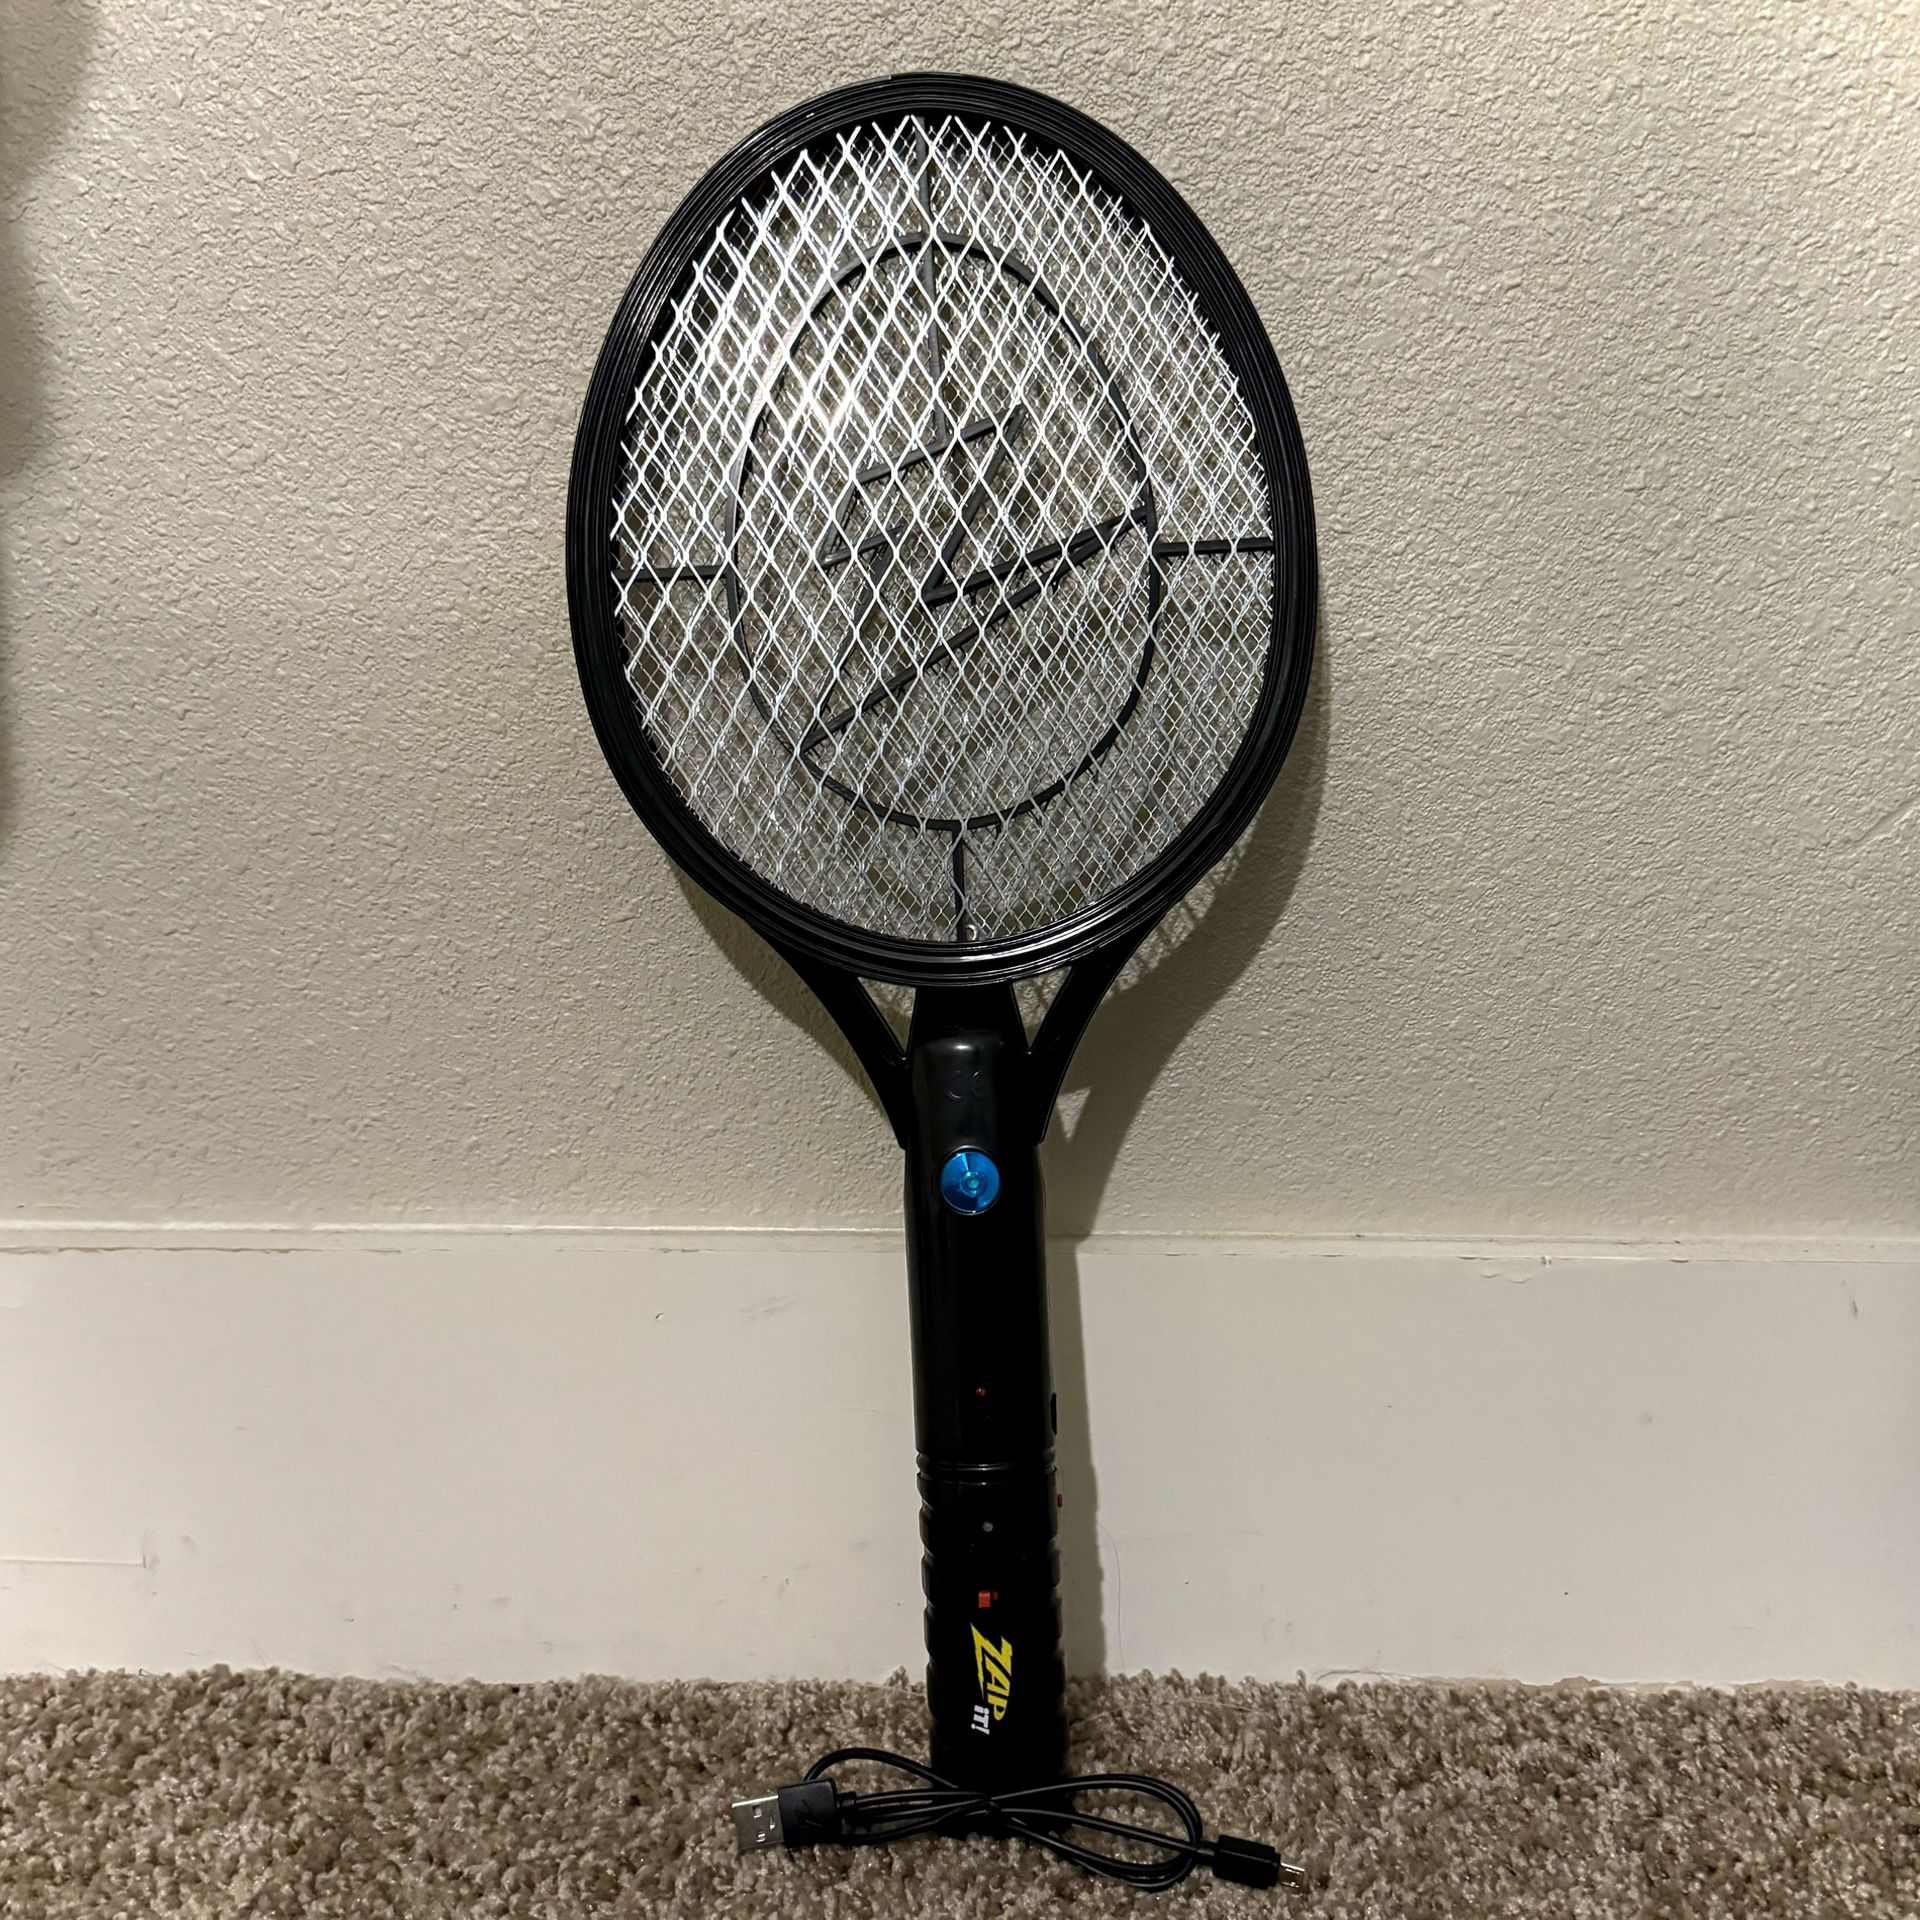 Zap It Mosquito And Fly Killer Electric Racket